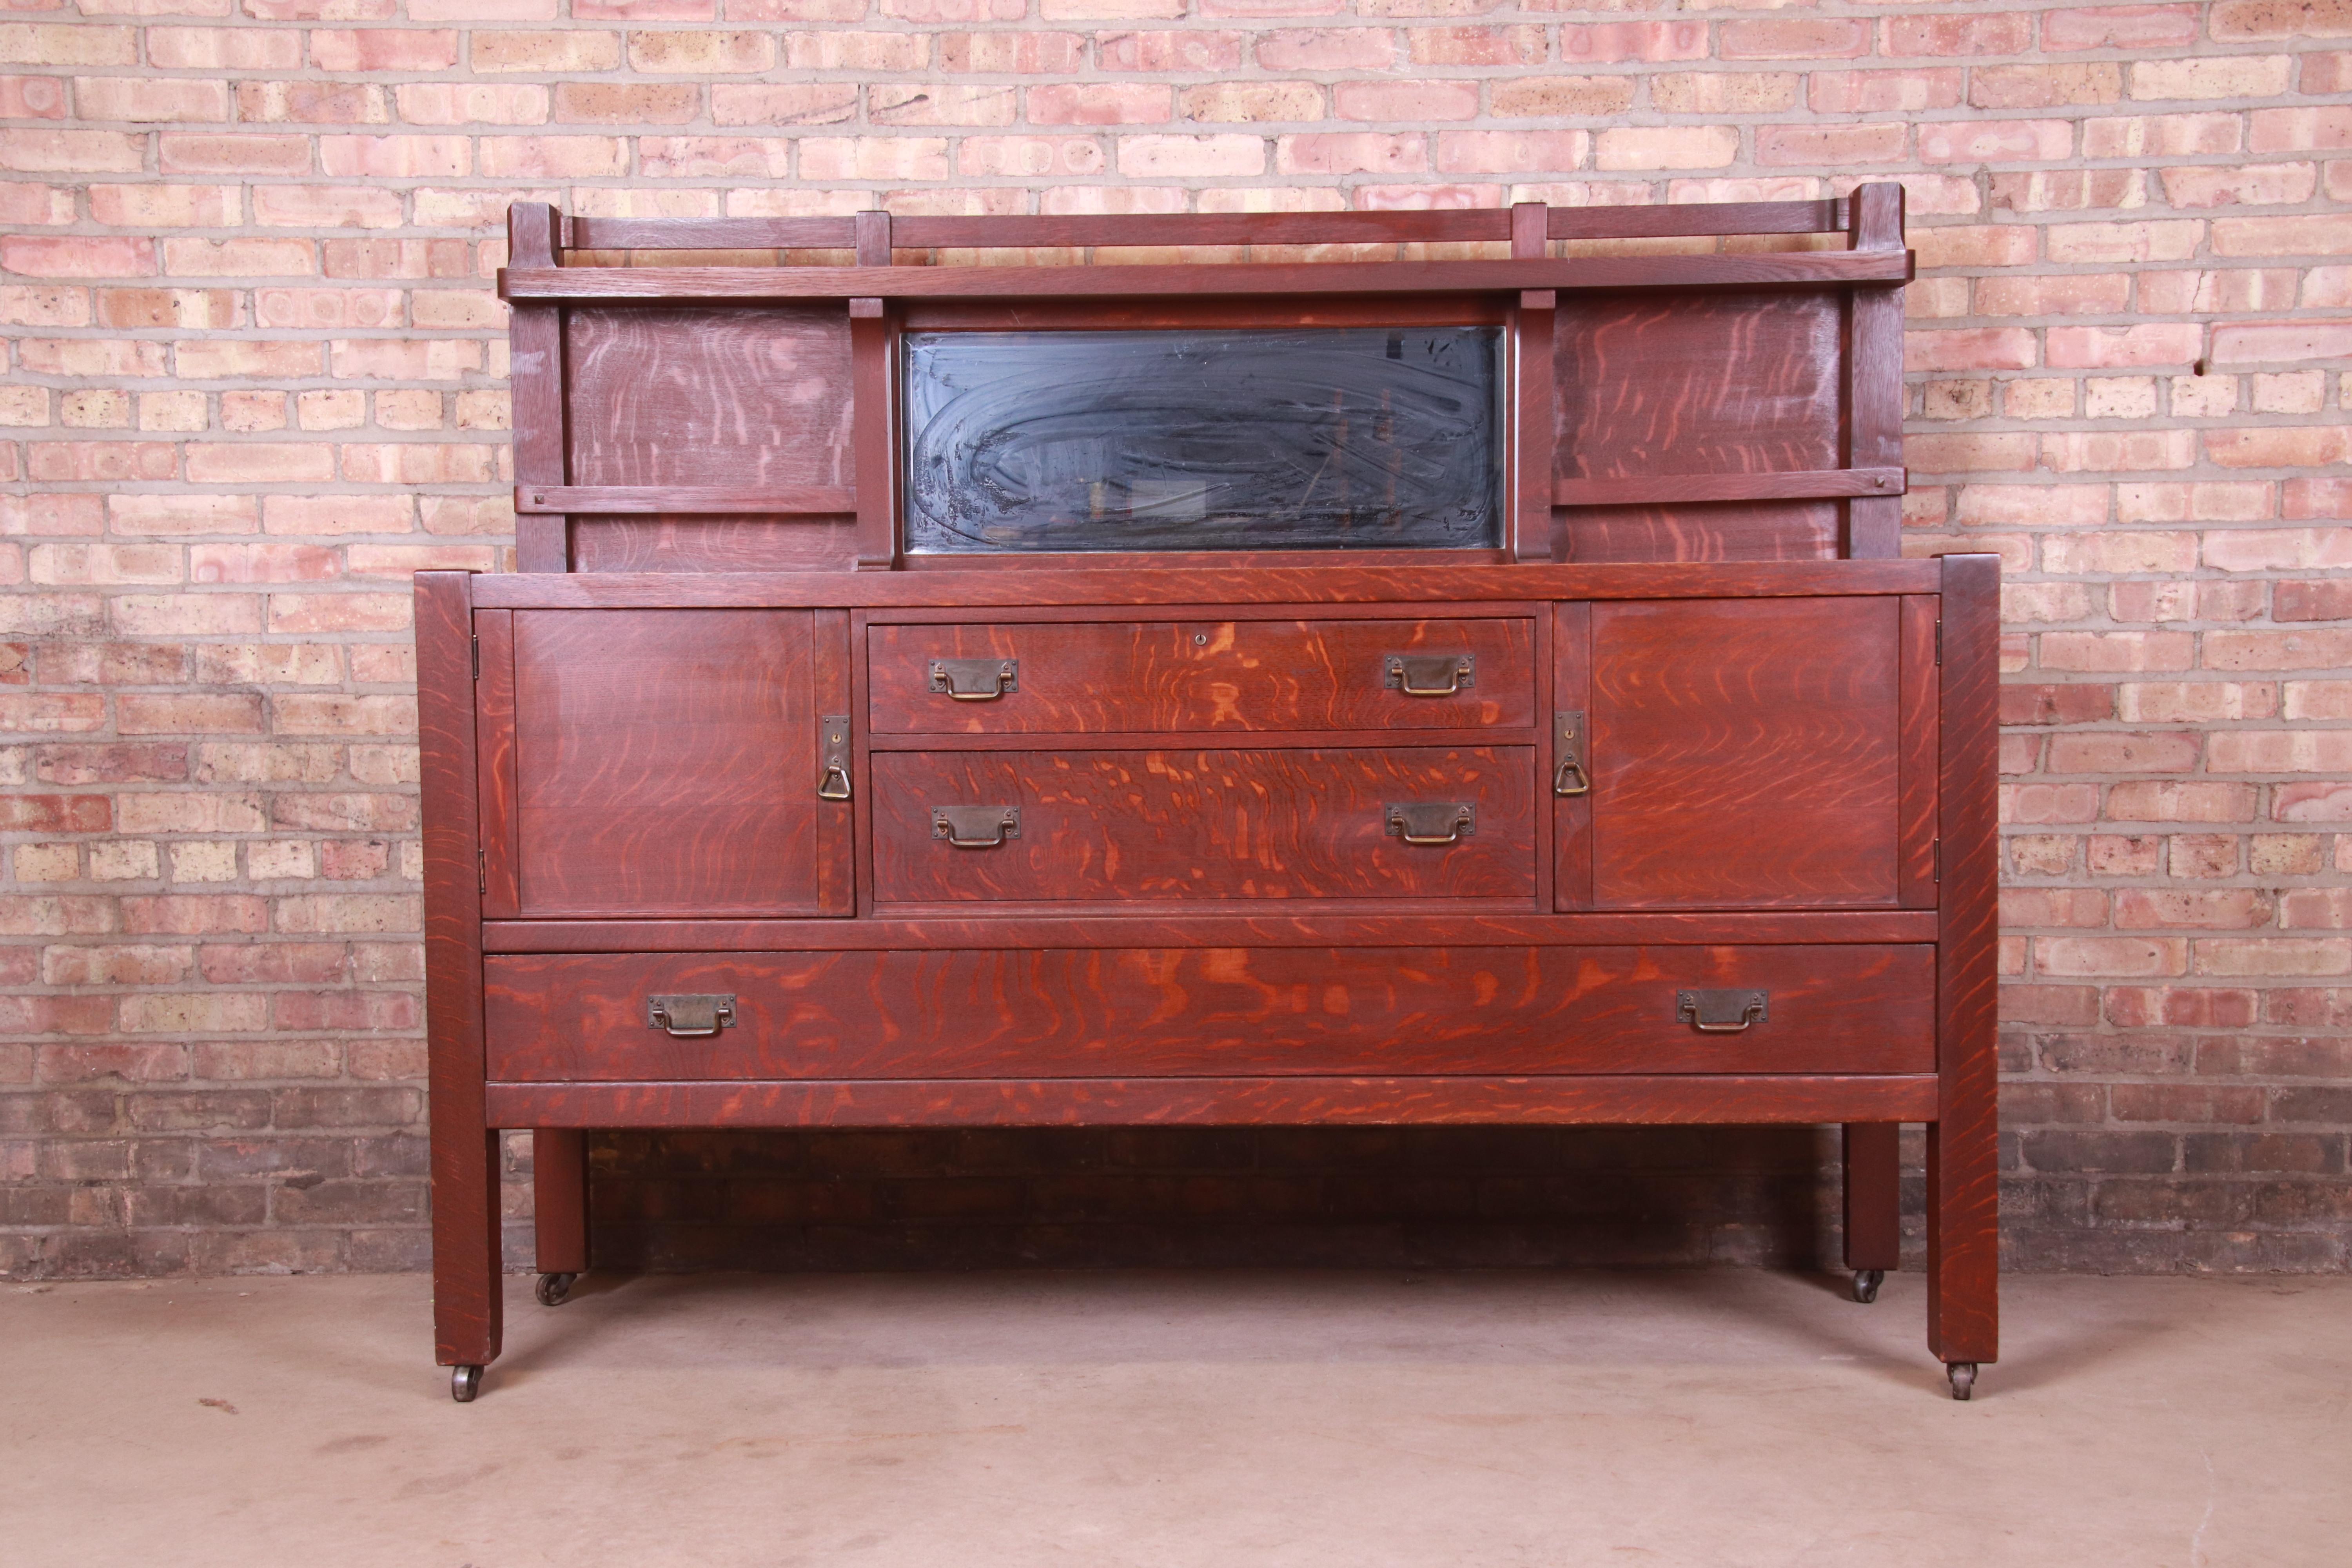 A gorgeous antique Mission oak Arts & Crafts sideboard, credenza, or bar cabinet

Attributed to Stickley Brothers

USA, Circa 1900

Quarter sawn oak, with original hammered copper hardware and mirrored backsplash.

Measures: 71.5